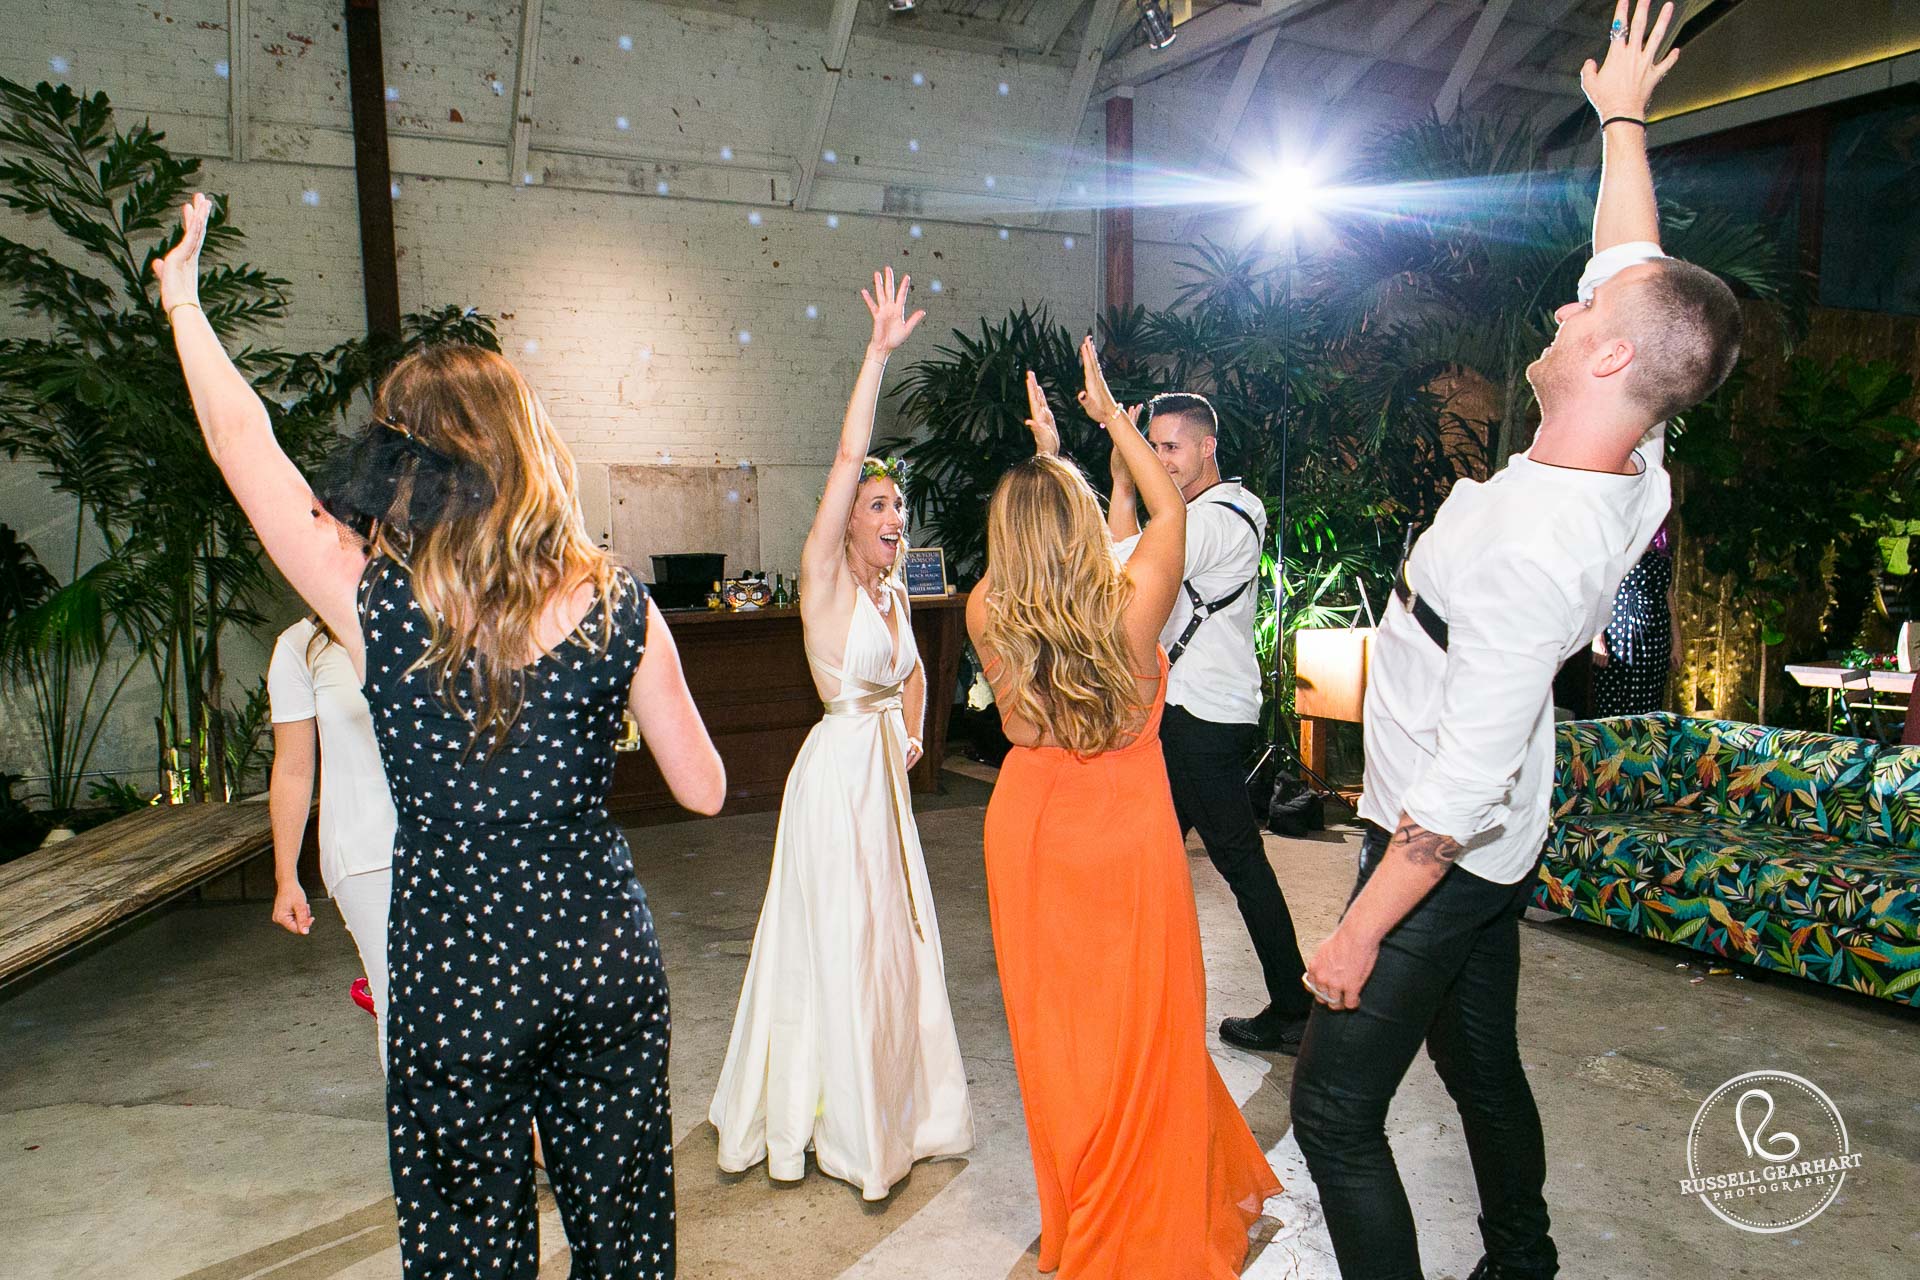 Reception Dancing – Millwick Wedding in Downton Los Angeles – www.gearhartphoto.com – Russell Gearhart Photography